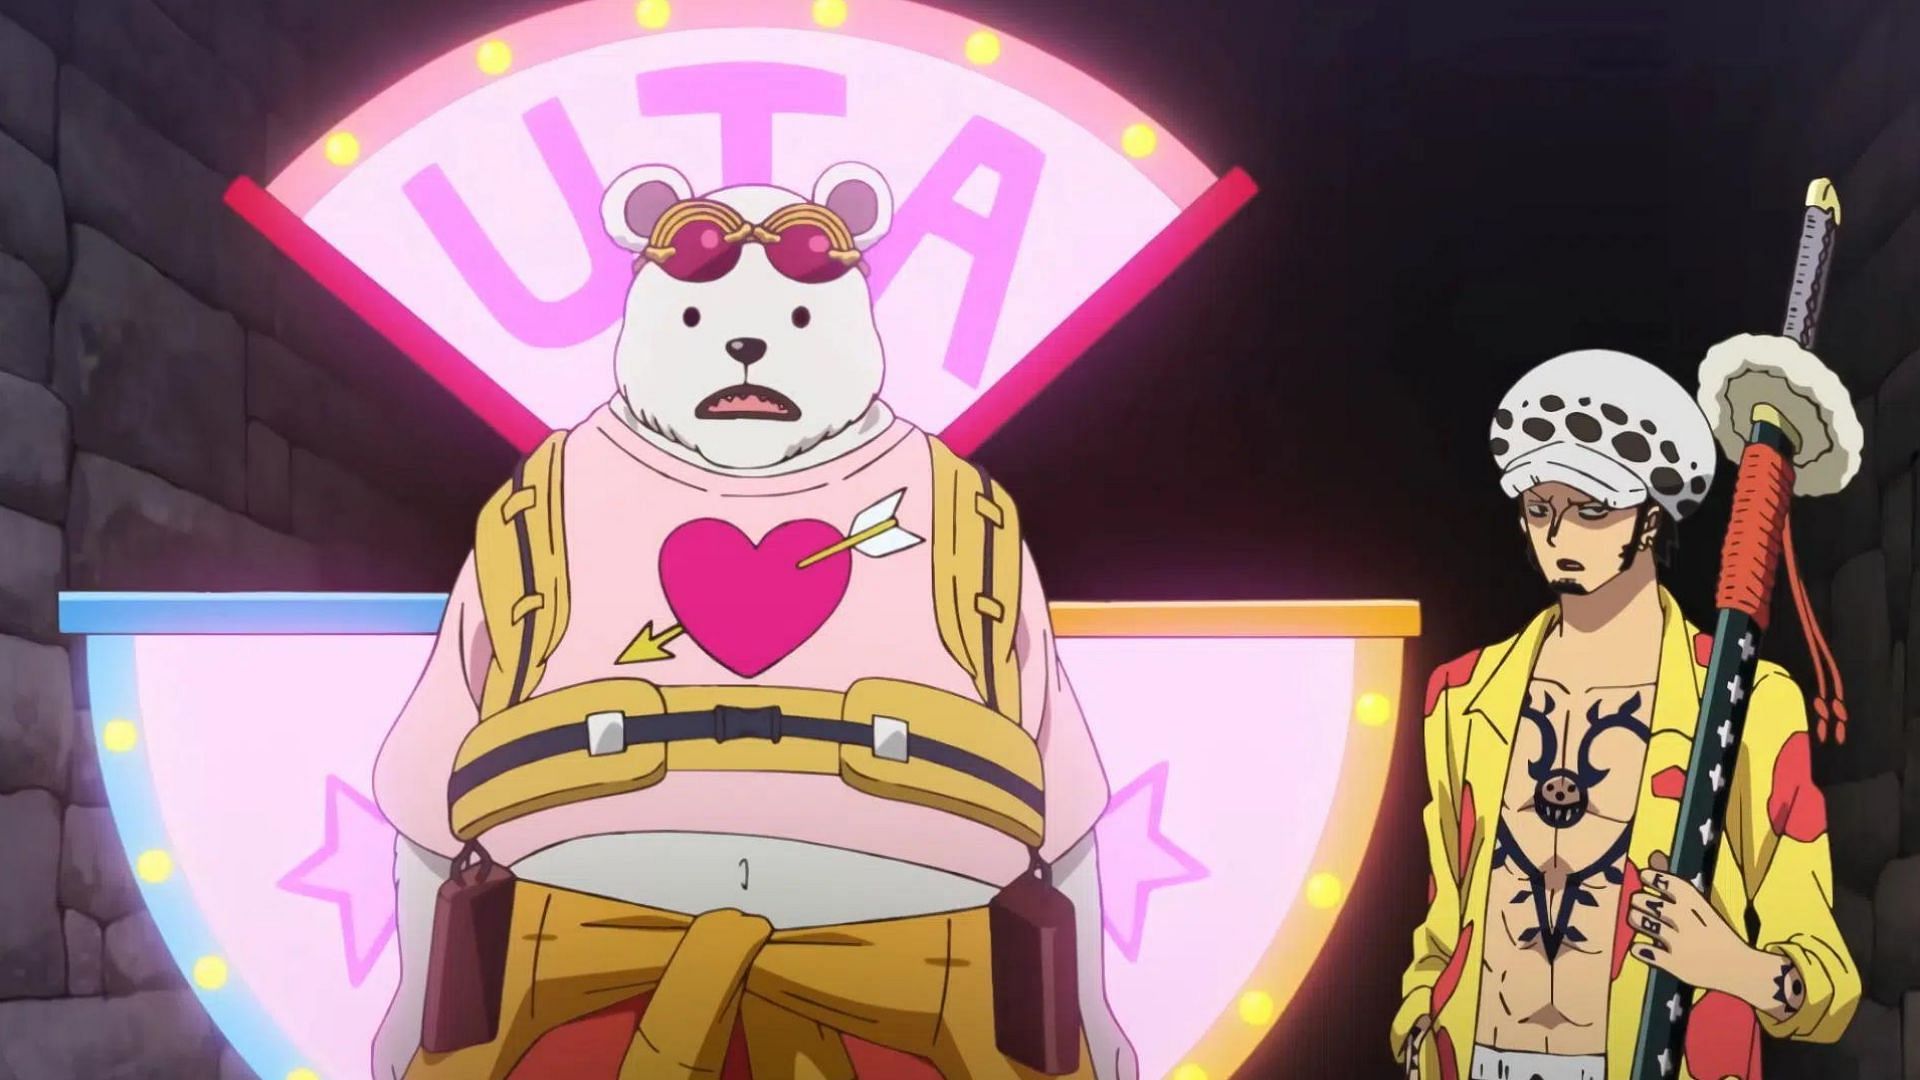 Bepo and Law in the movie (Image via Toei Animation)